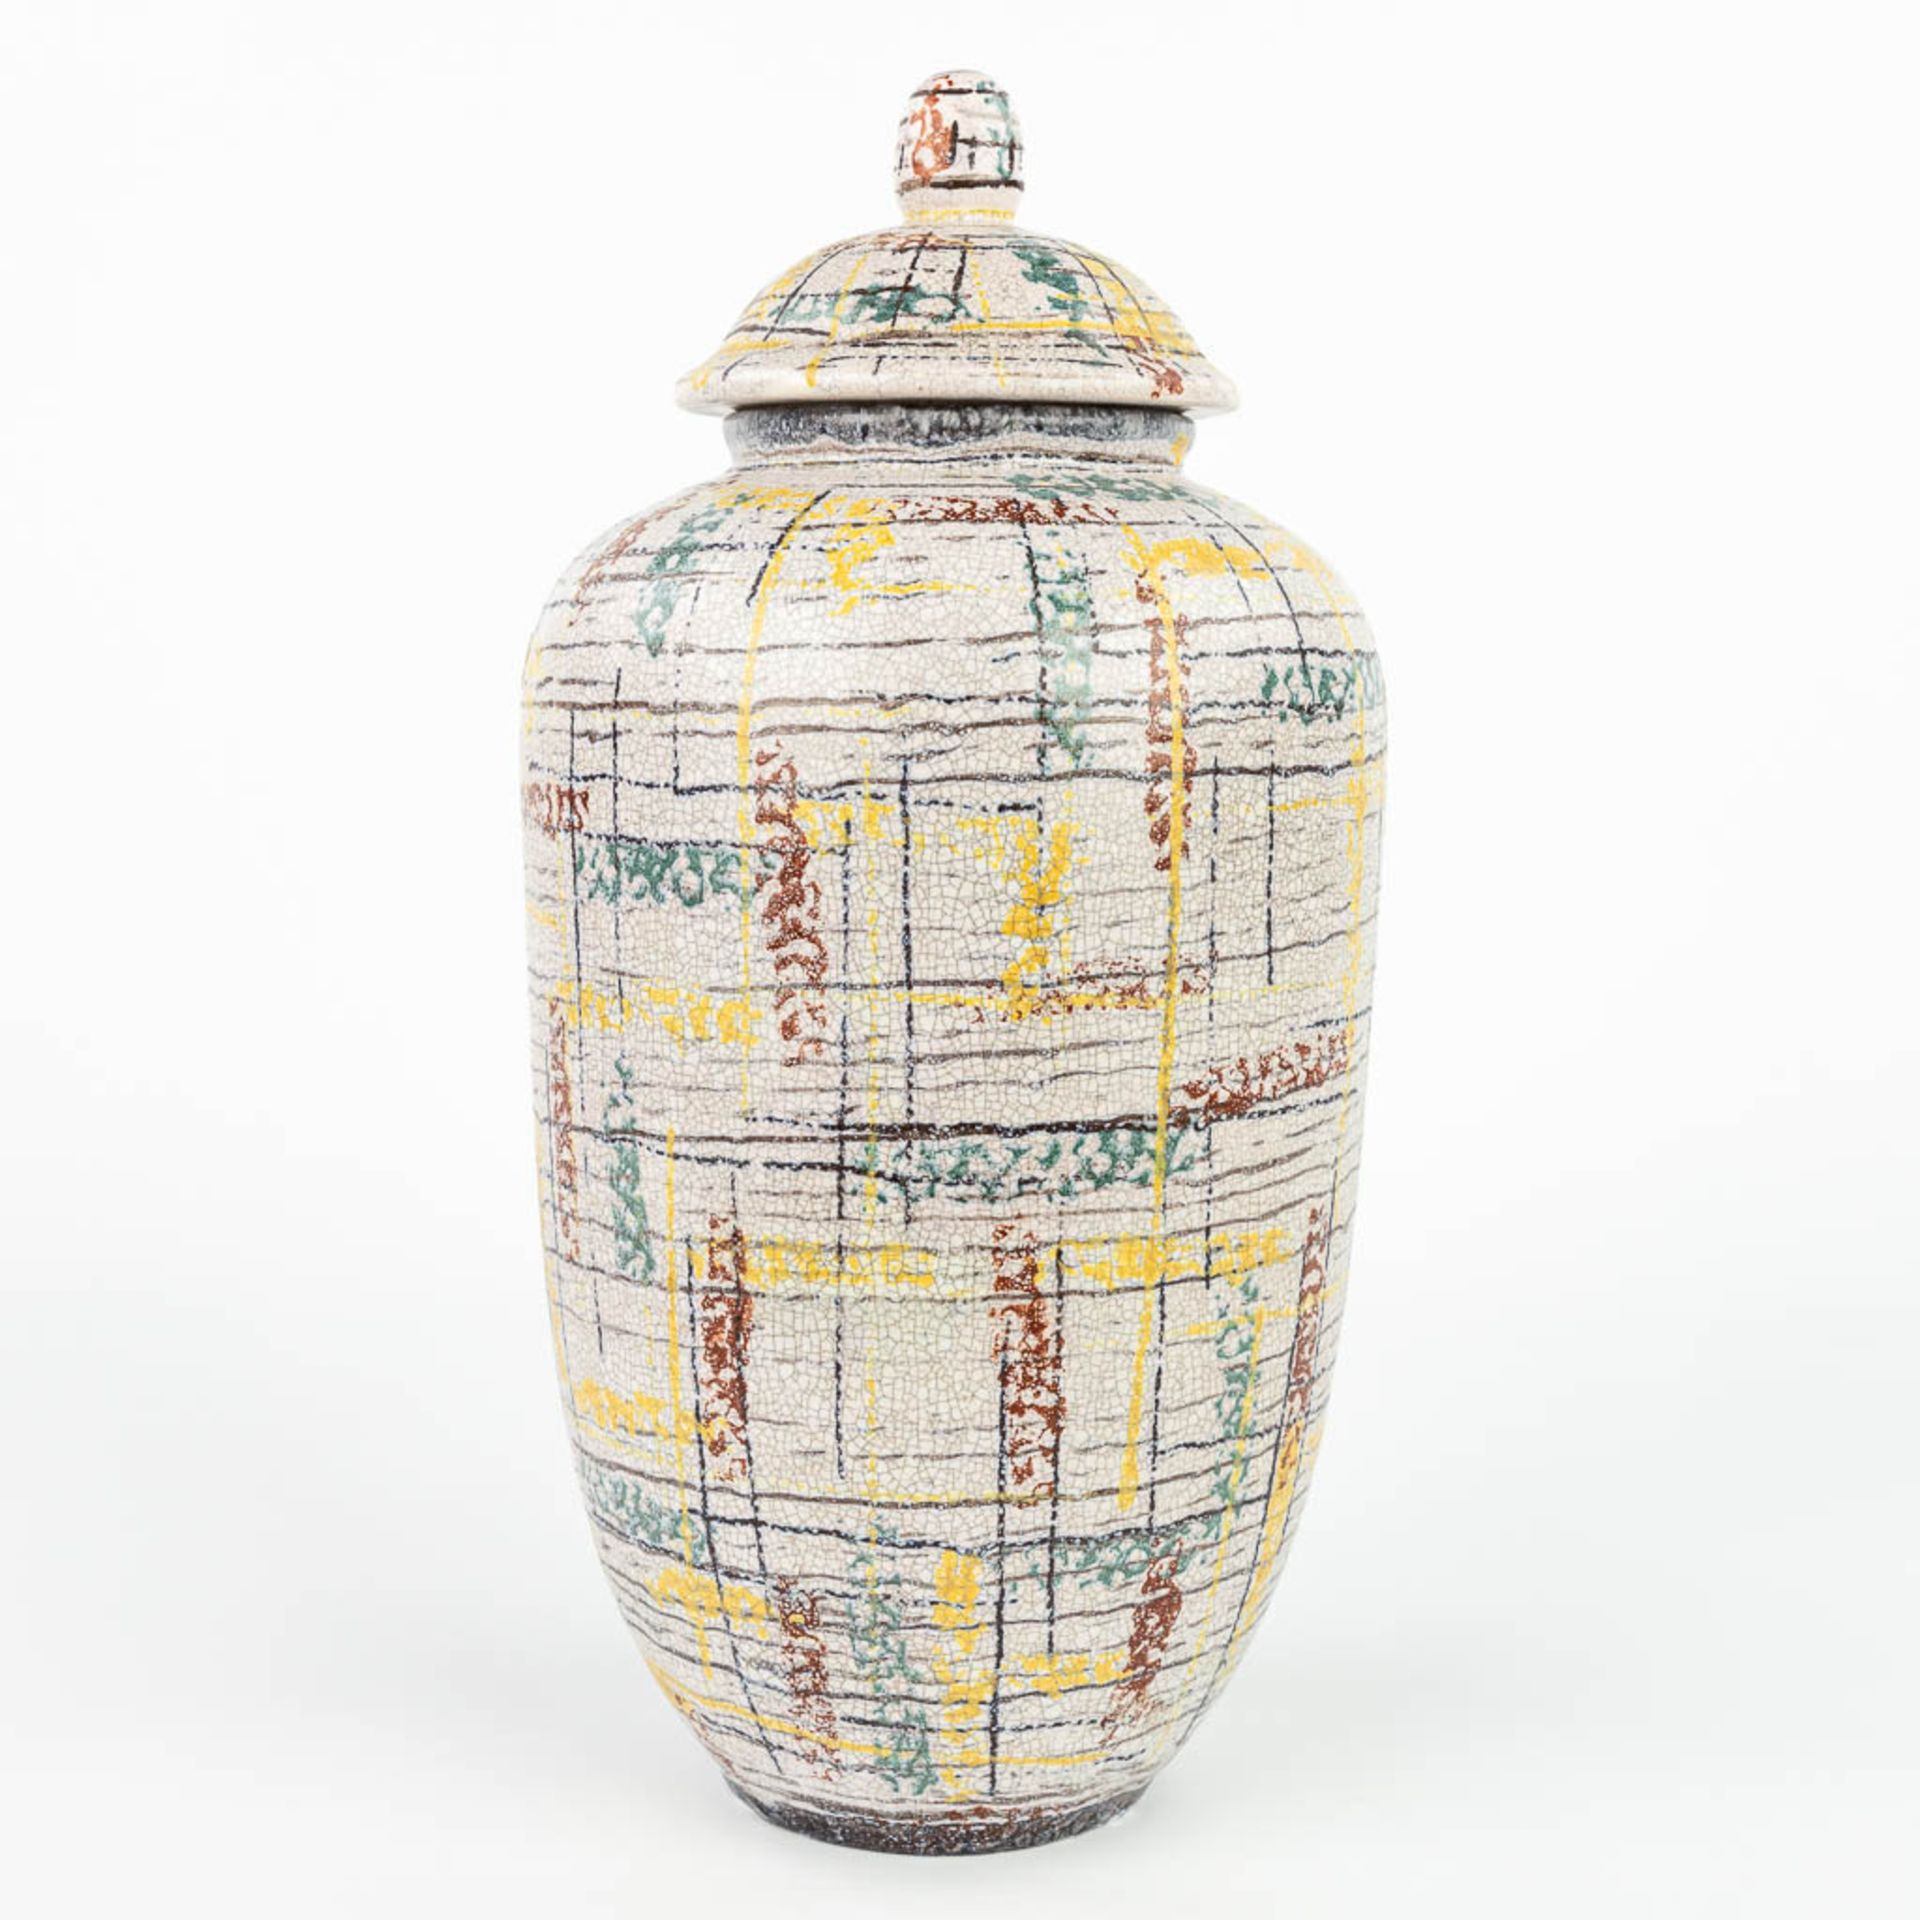 A vase with lid and made of glazed ceramics, marked U Keramik, made in Germany. (H:38cm) - Image 16 of 22